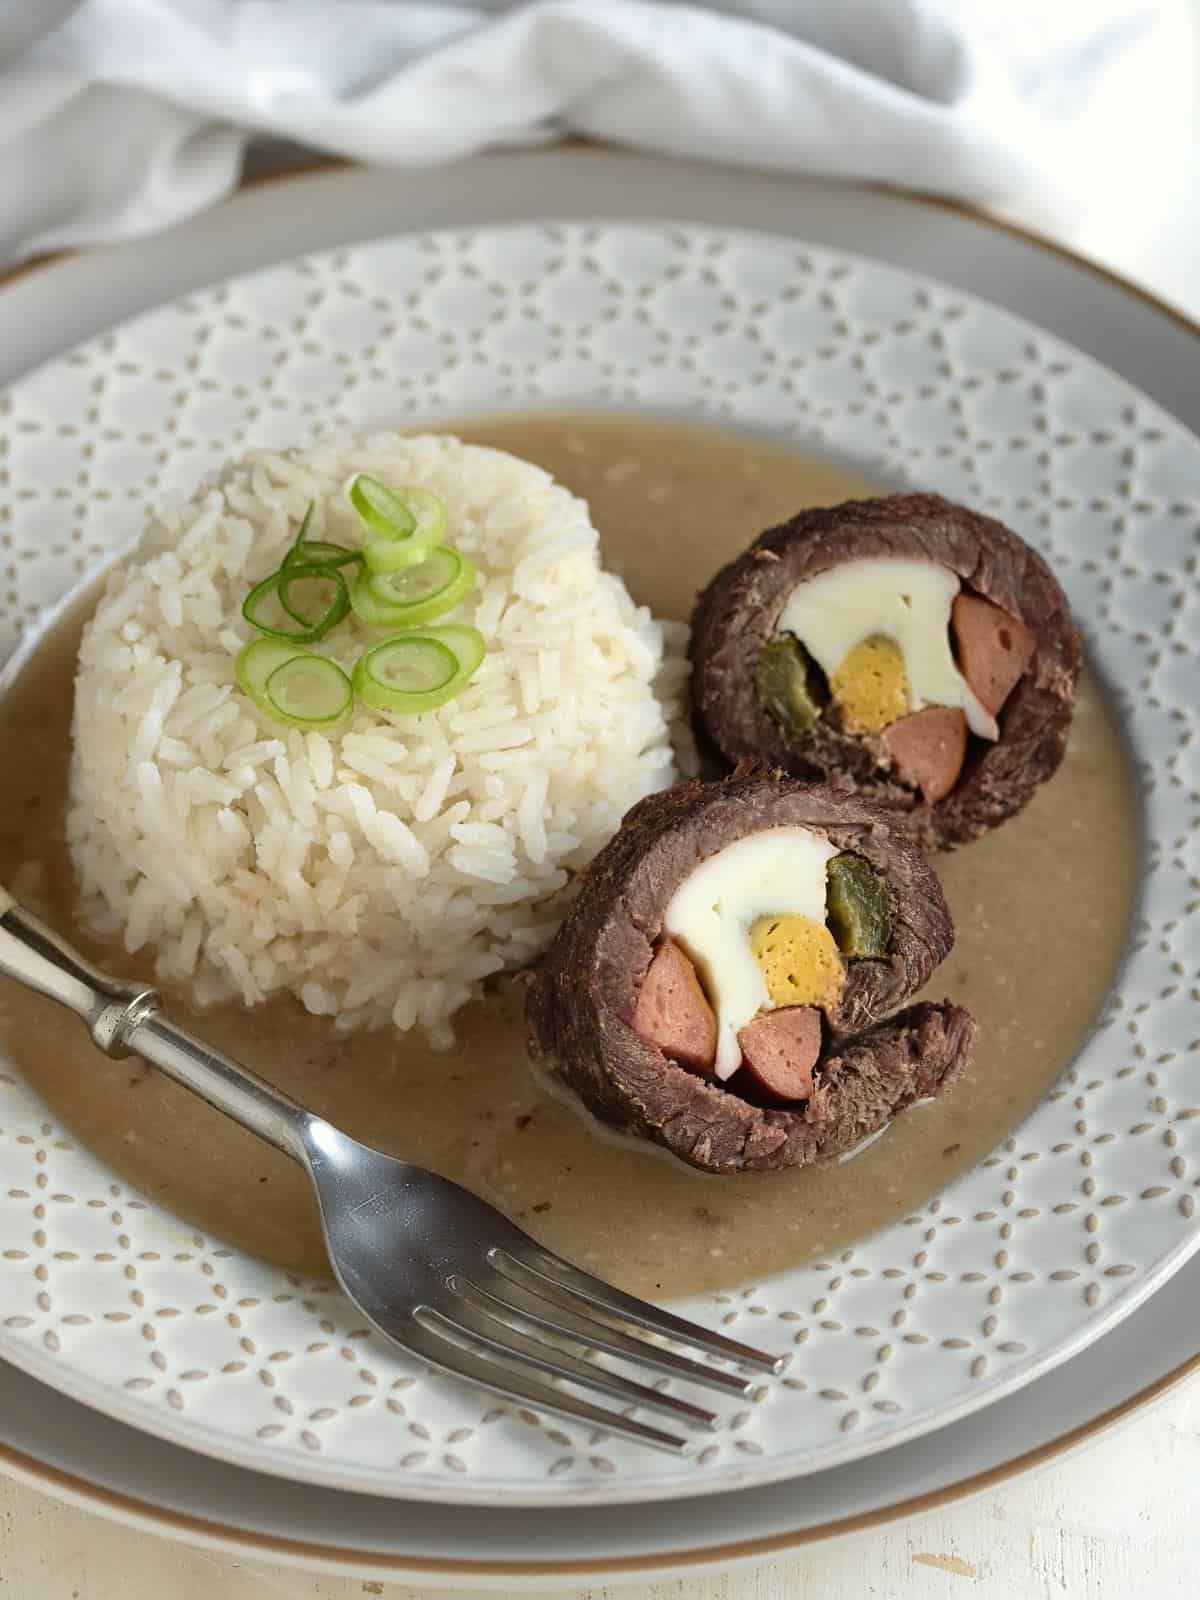 Czech spanelske ptacky beef roll ups served with rice and gravy.